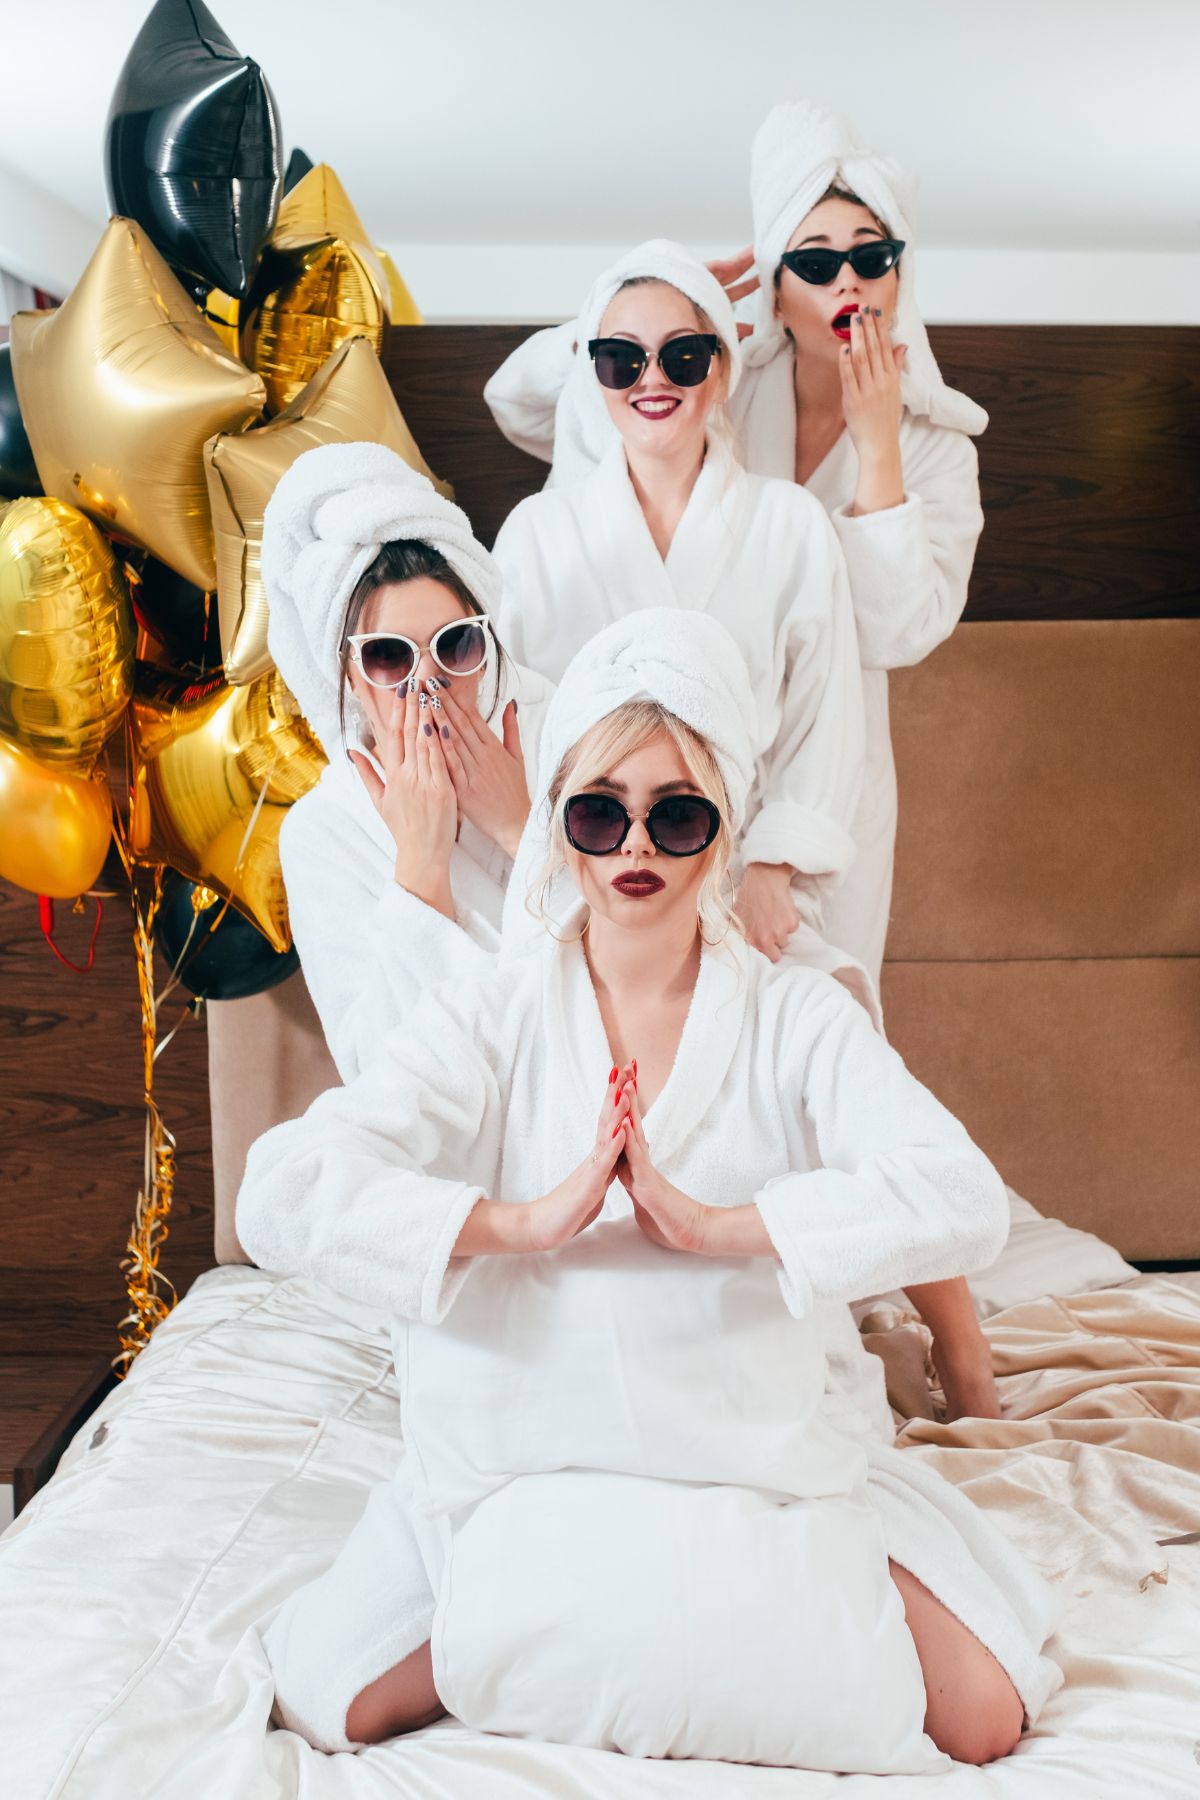 Local Affordable Bachelorette Party Ideas